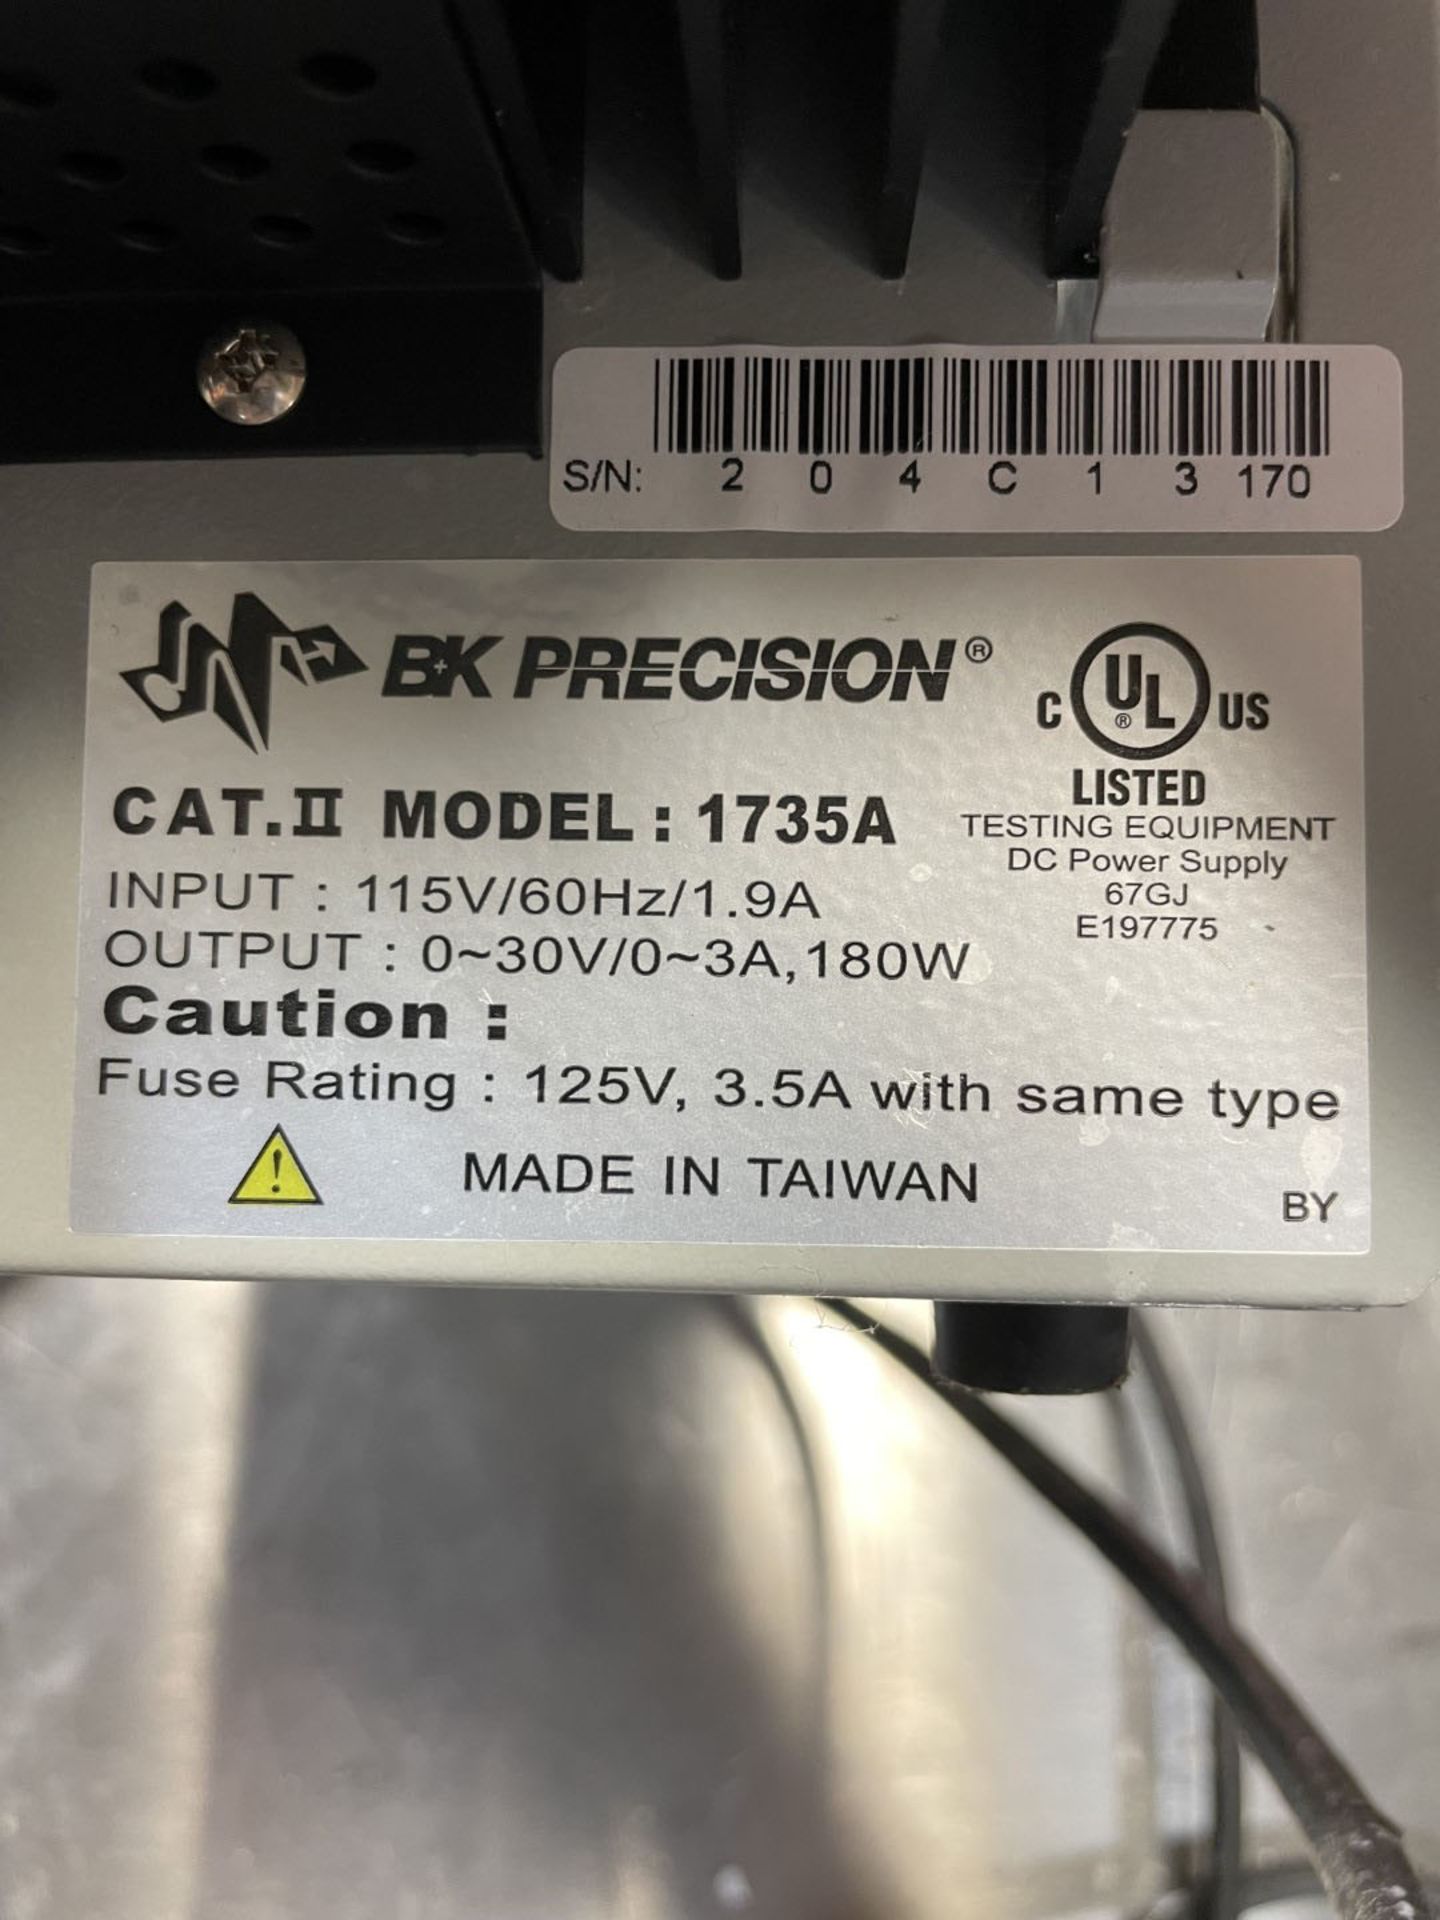 BK Precision DC Power Supply, Model 1735A - Image 2 of 2